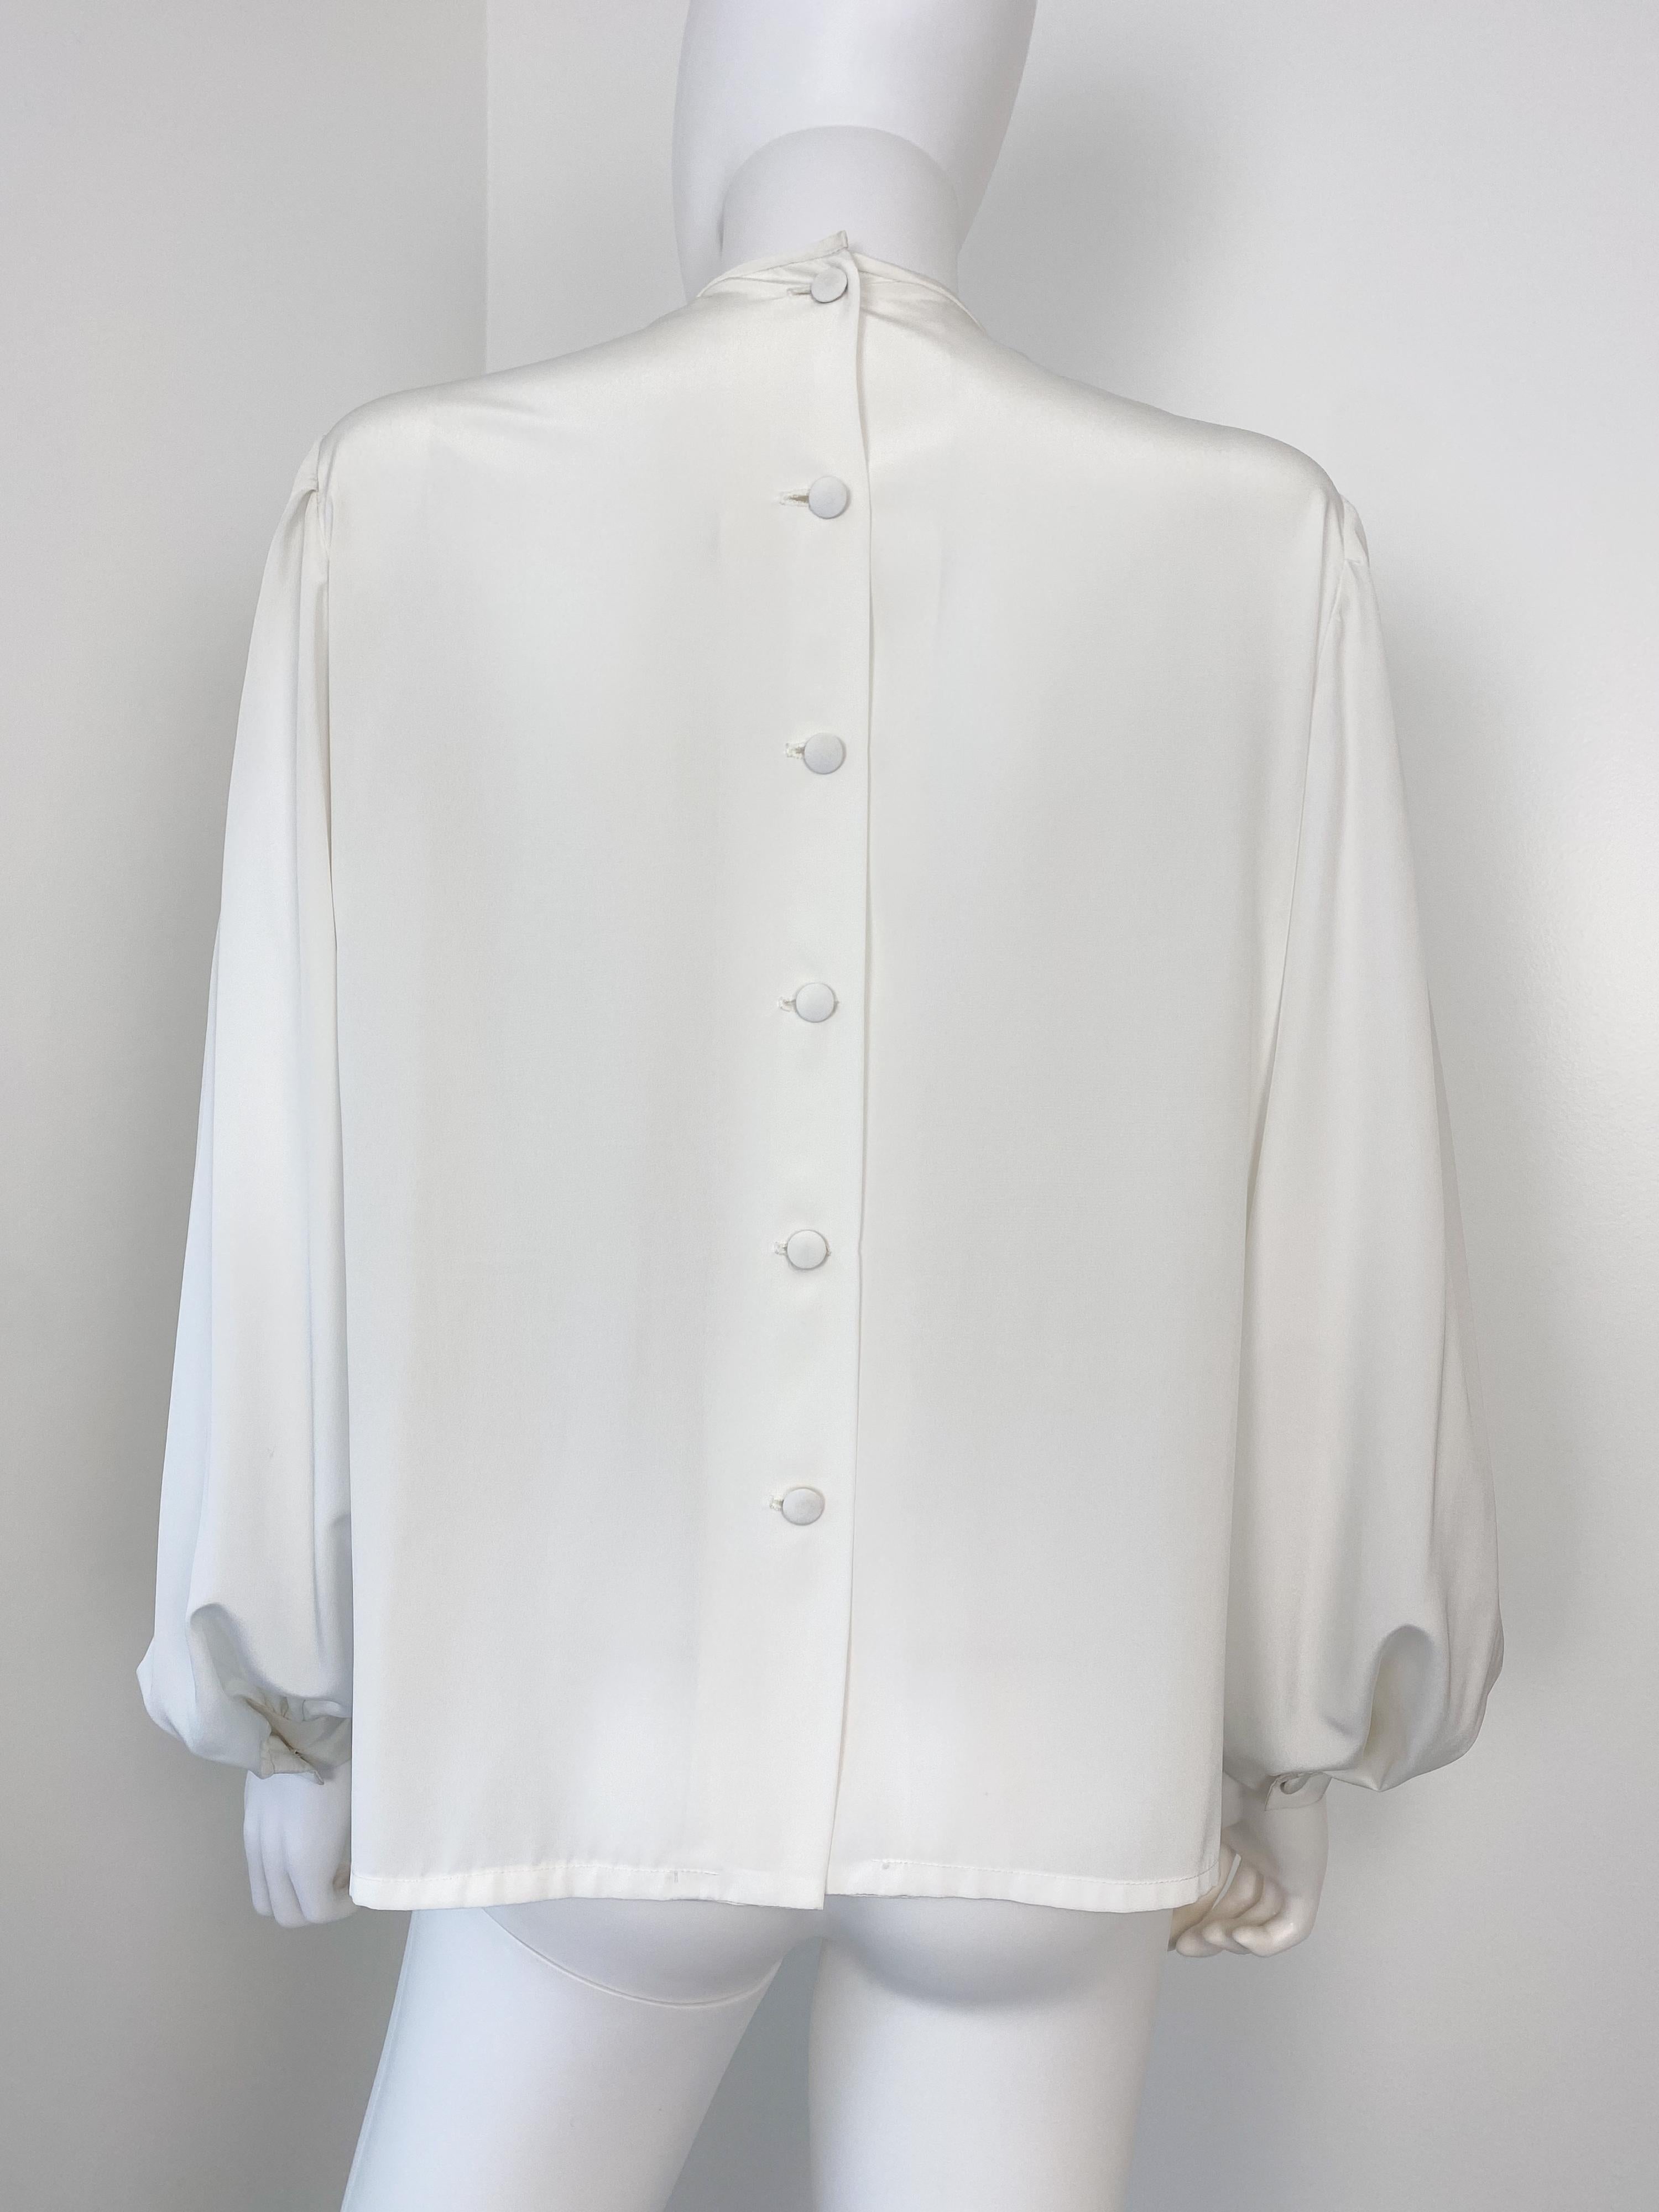 Vintage 1970s Silky Polyester Blouse Top White Origami Pleat Size 10/12 For Sale 3